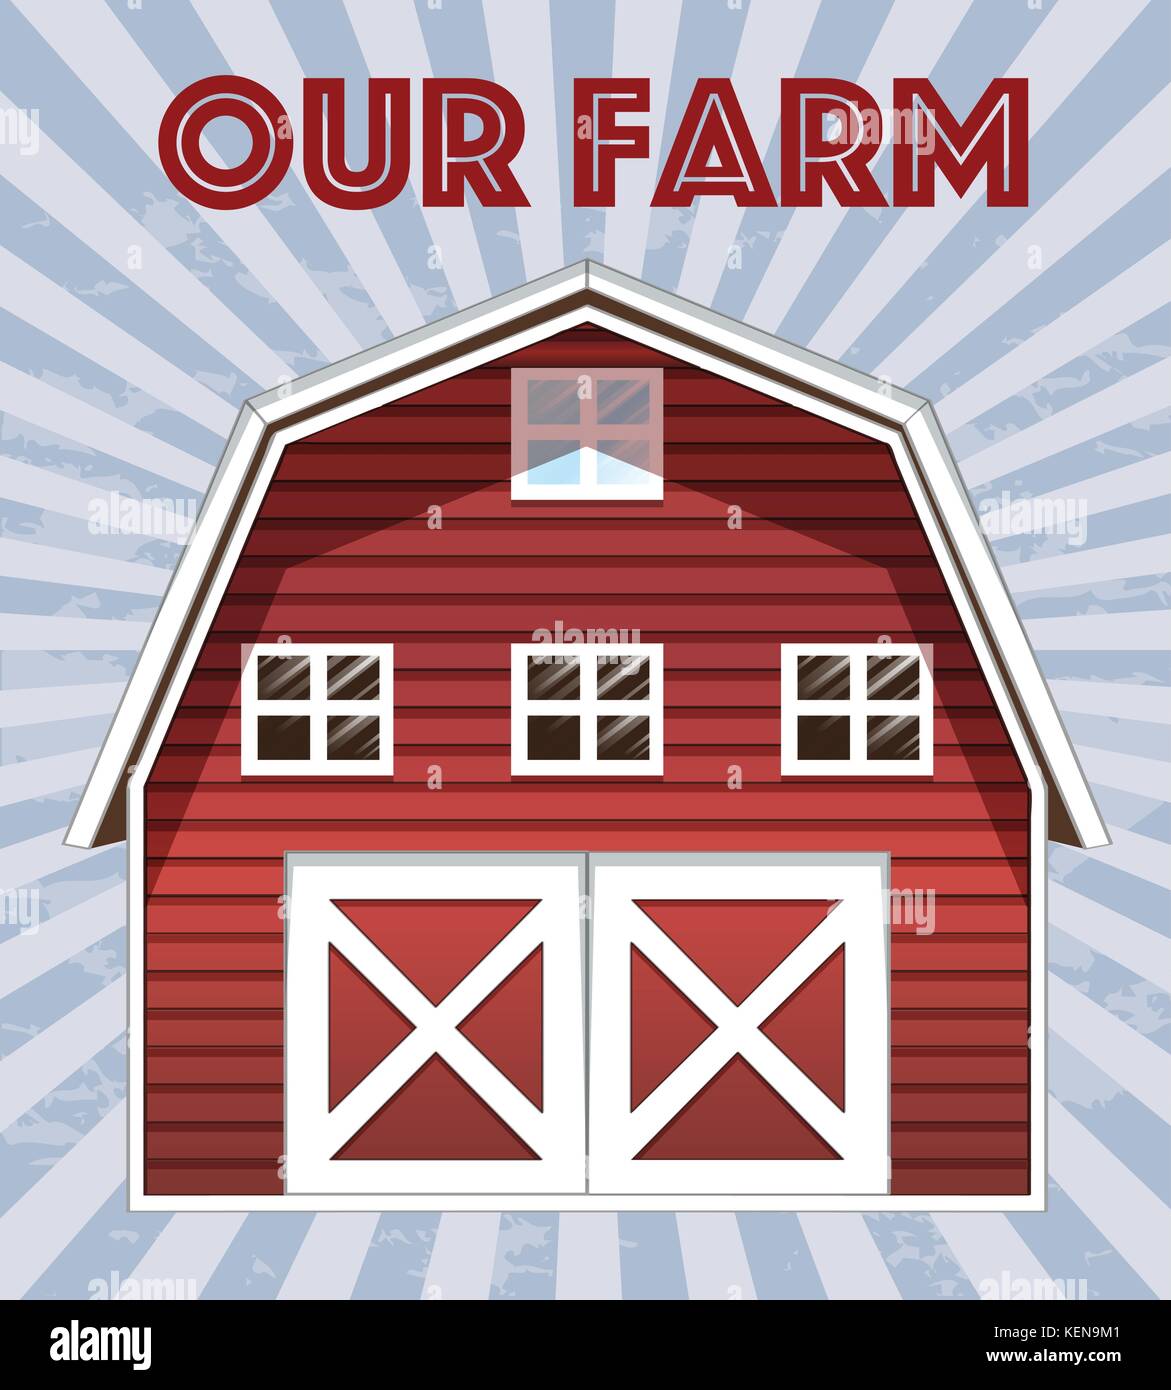 Illustration of a farm poster Stock Vector